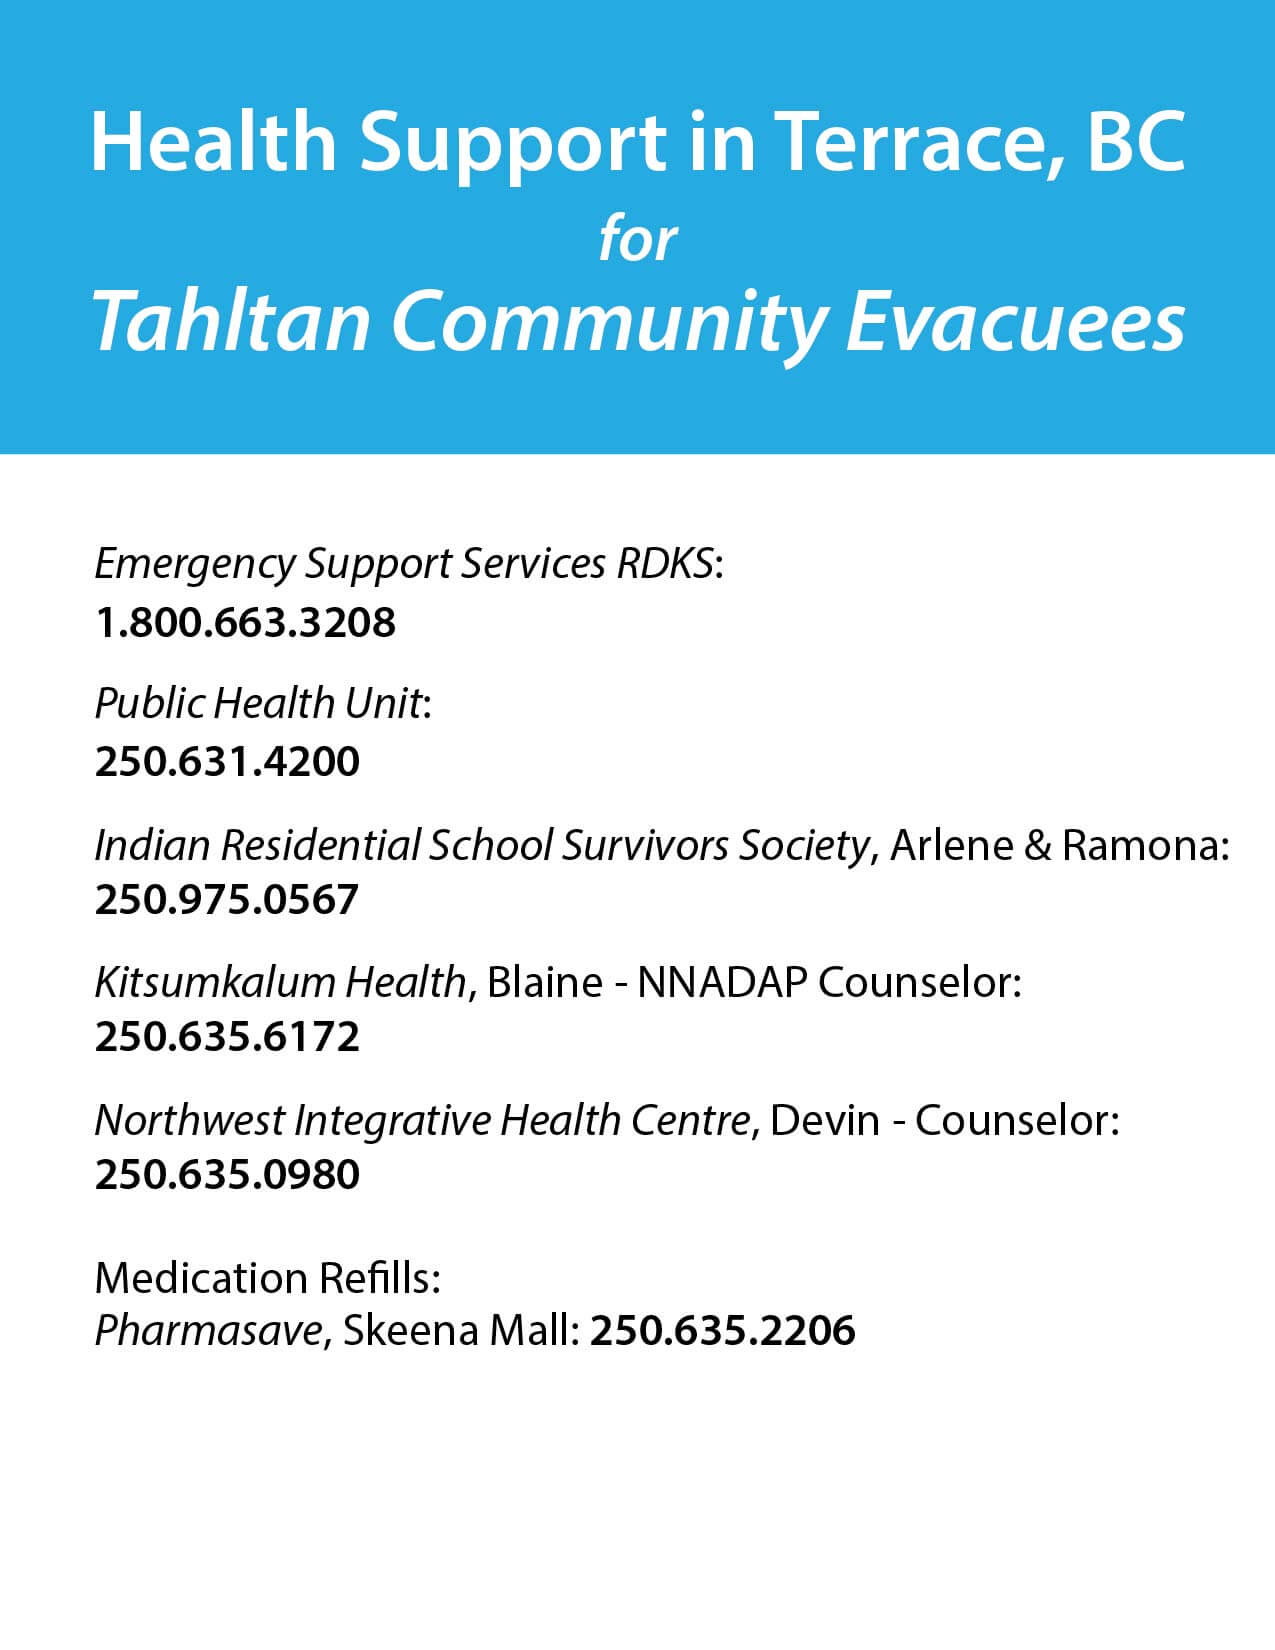 Health Support in Terrace for Tahltan Community Evacuees